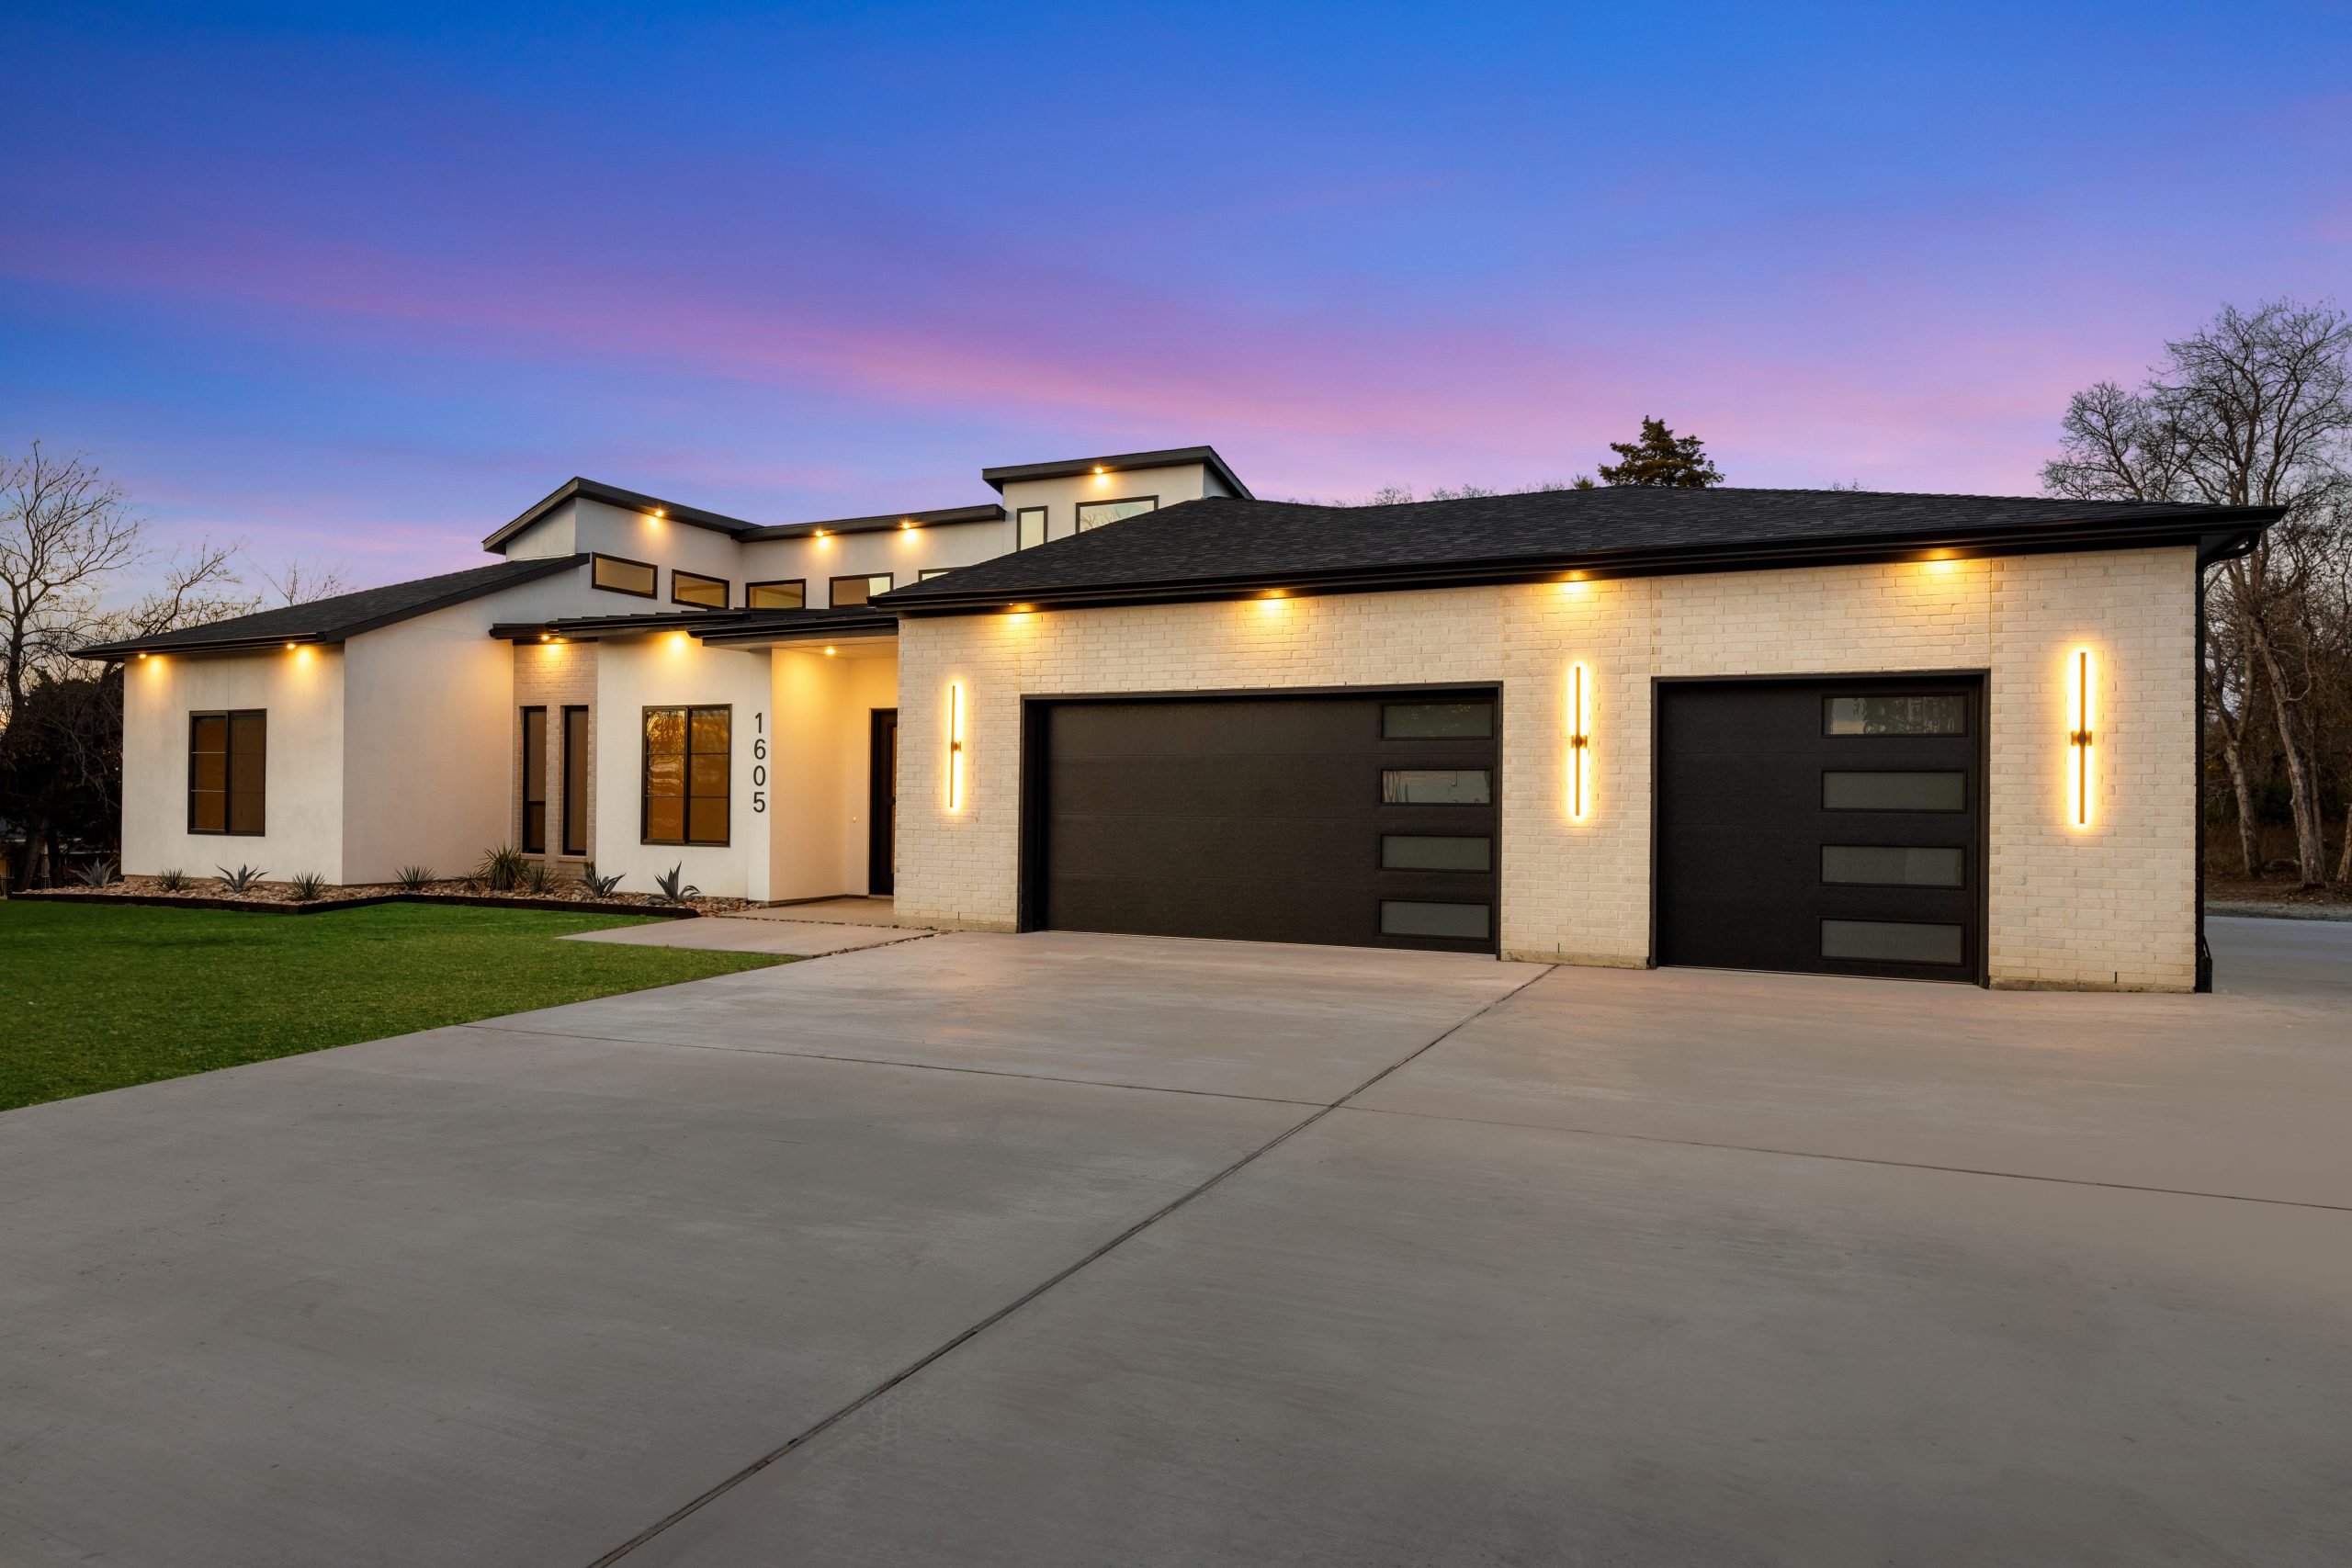 Twilight image of front exterior of home